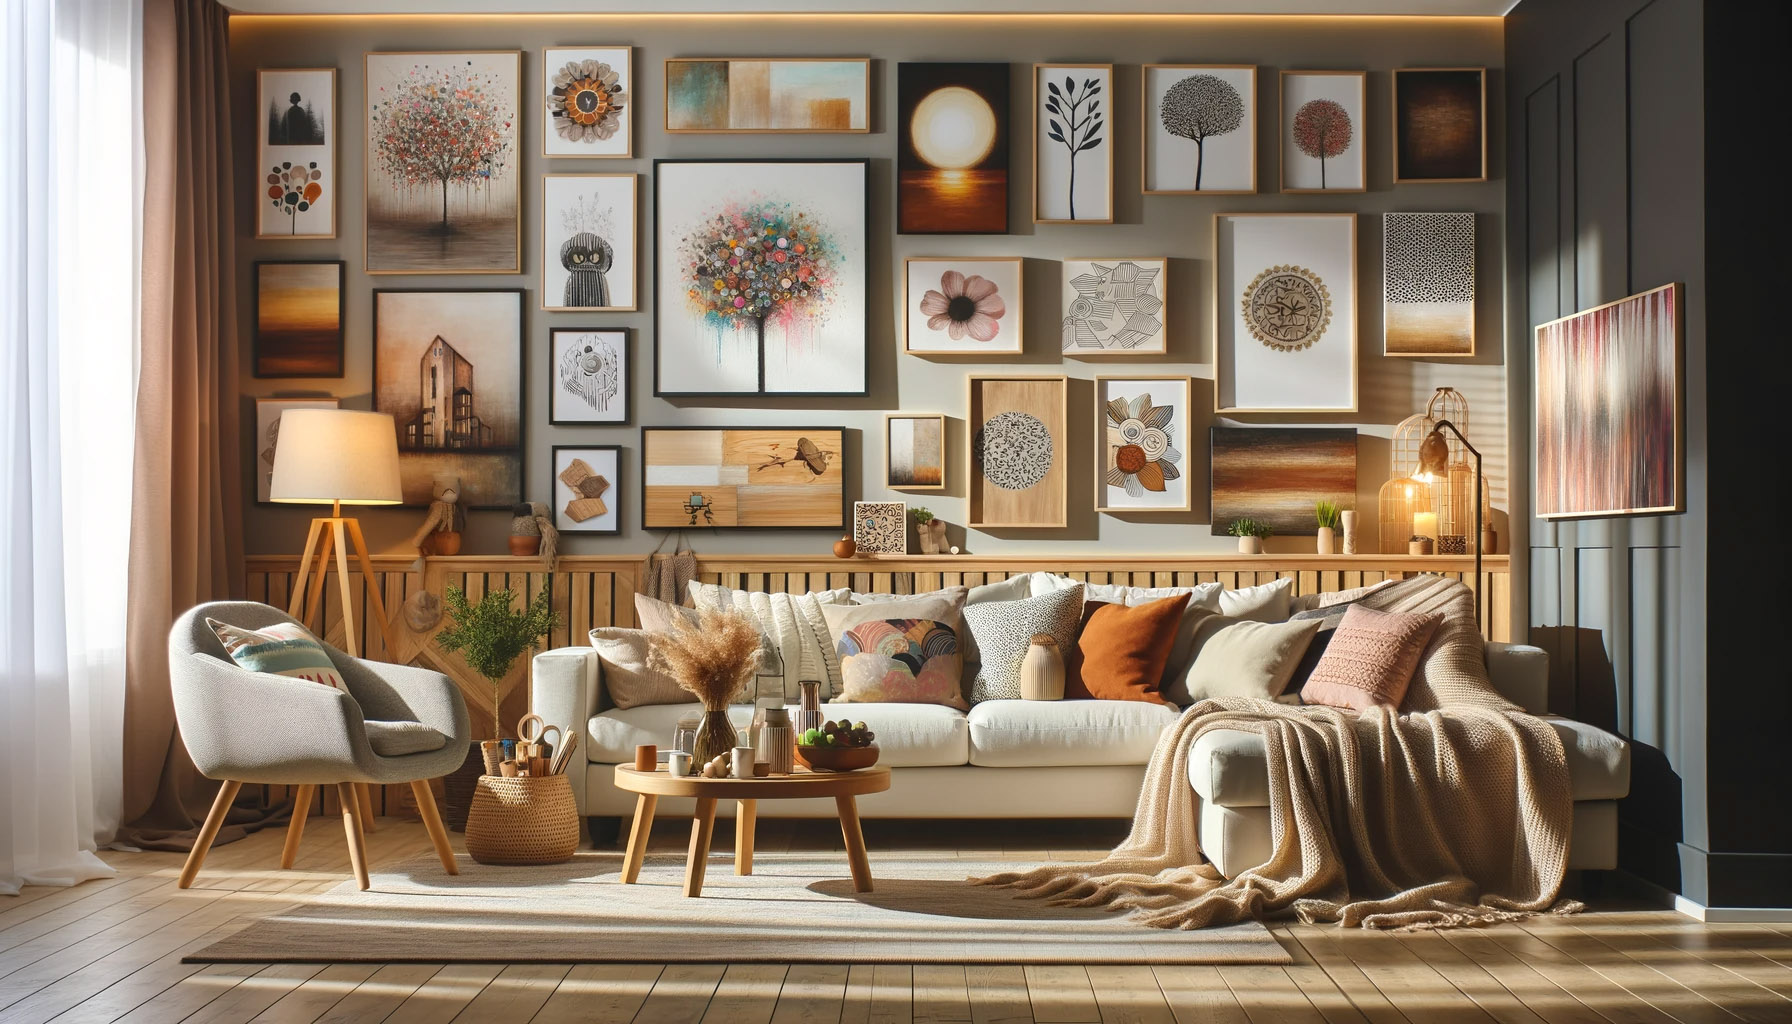 A cozy and modern living room, featuring a variety of DIY wall art pieces